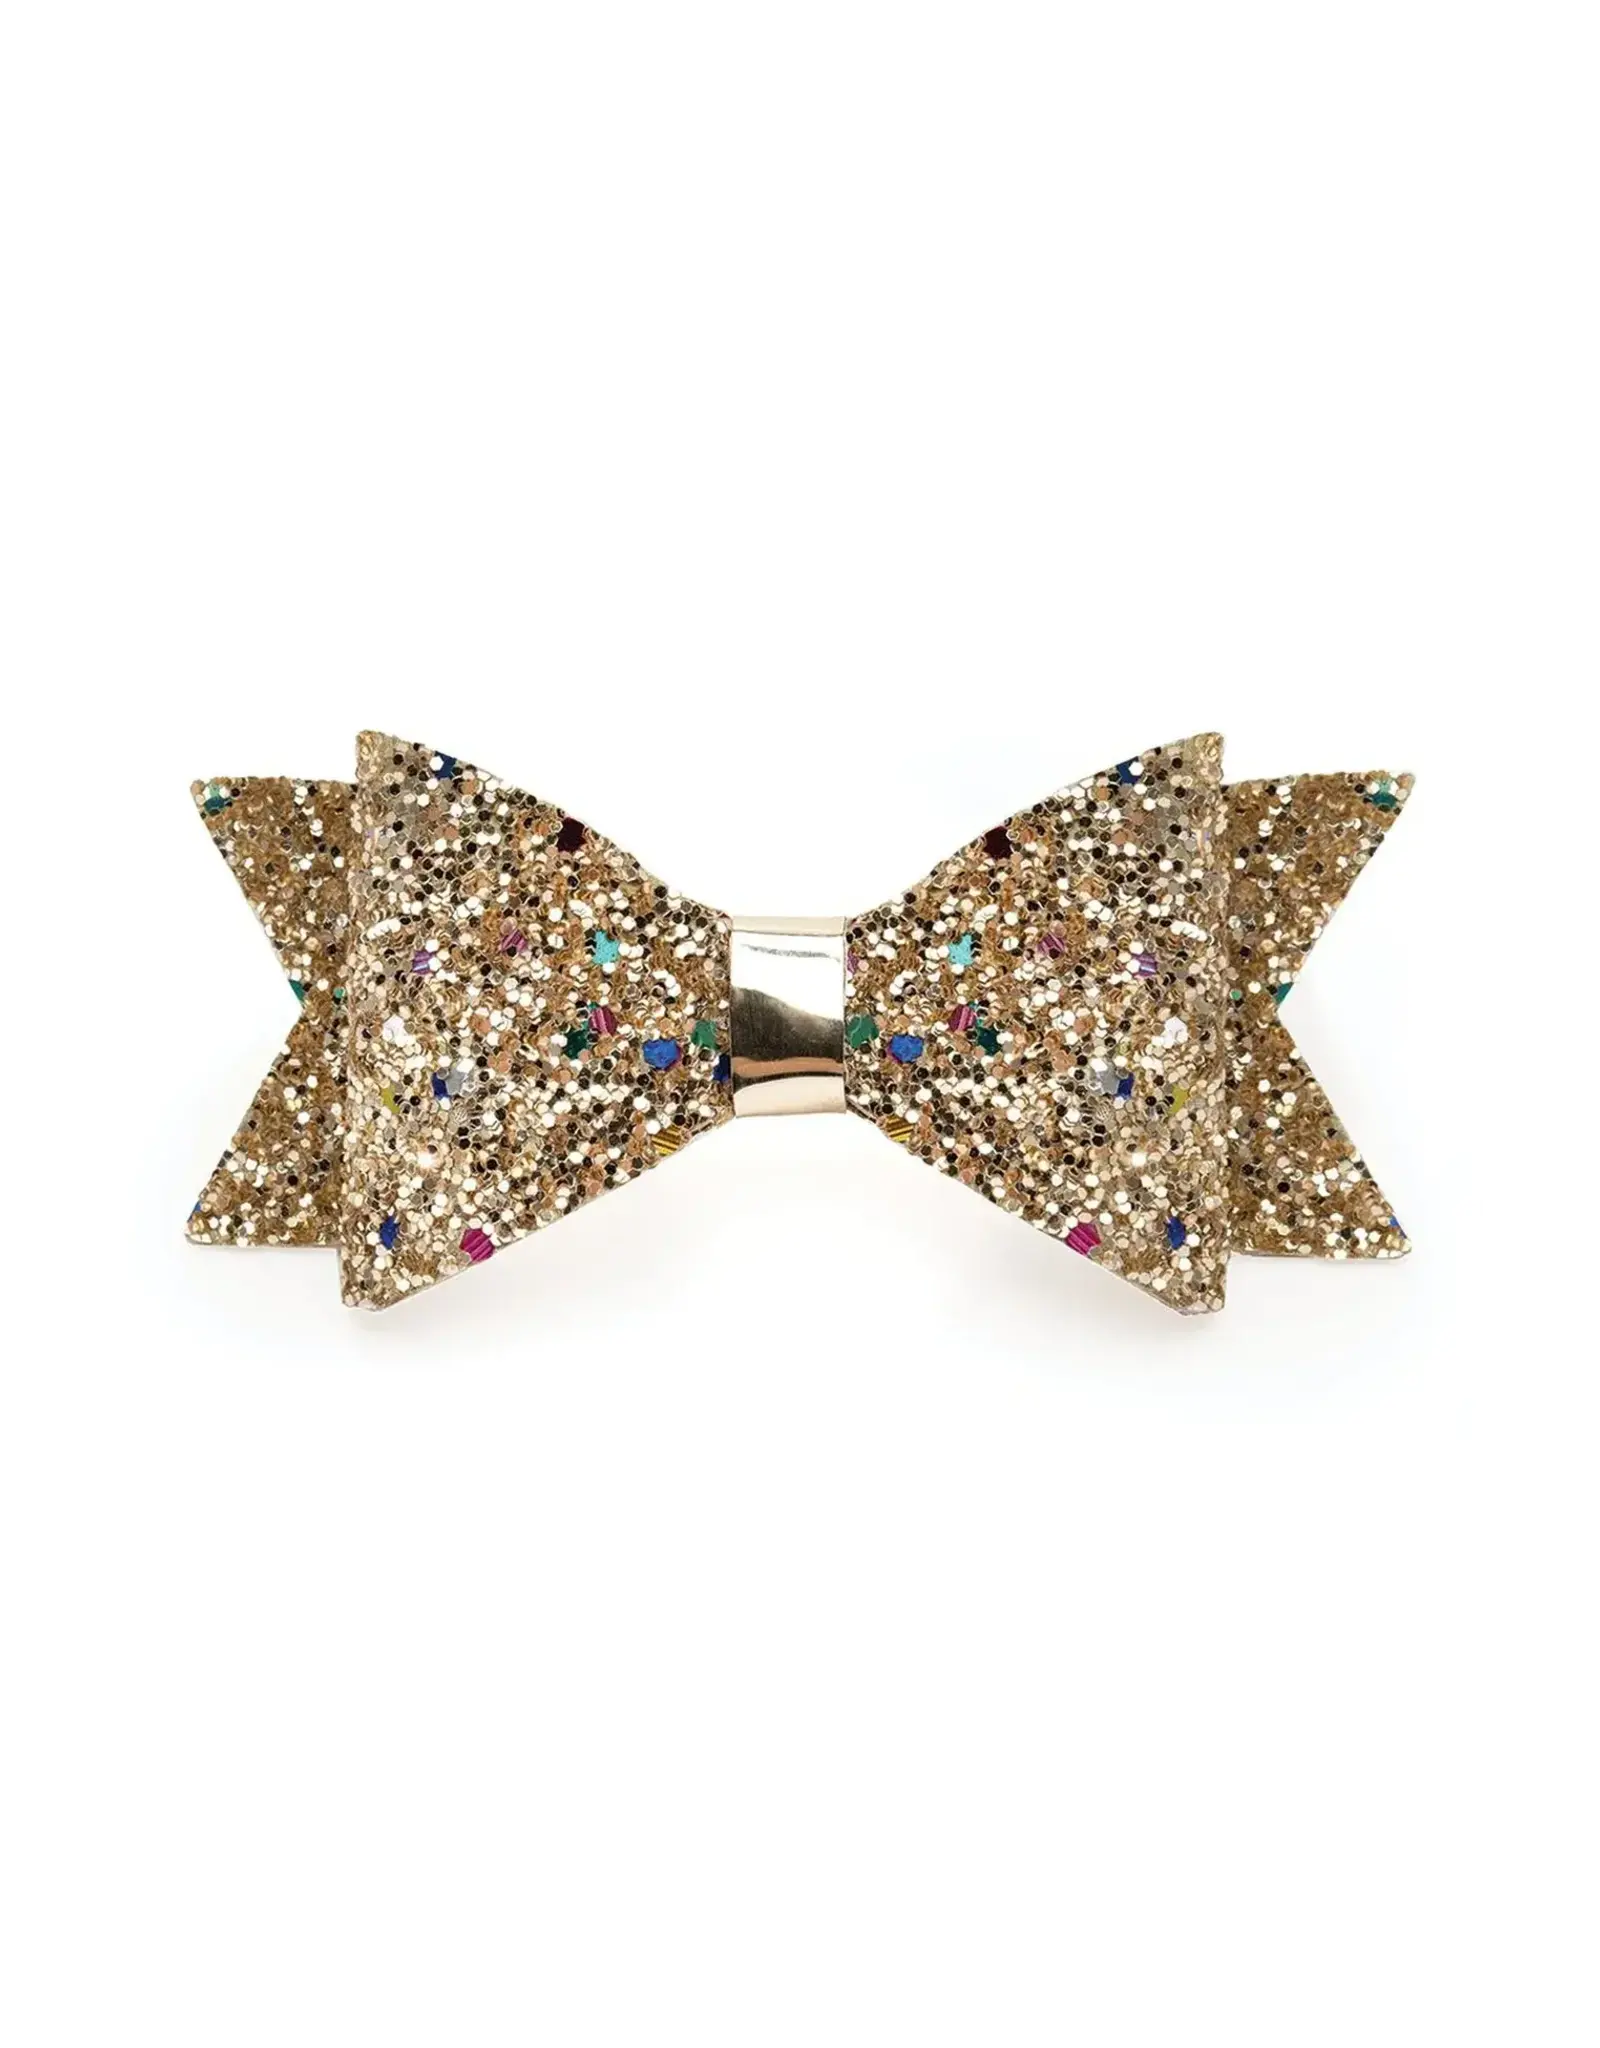 Great Pretenders The Great Gold Bow Hair Clip